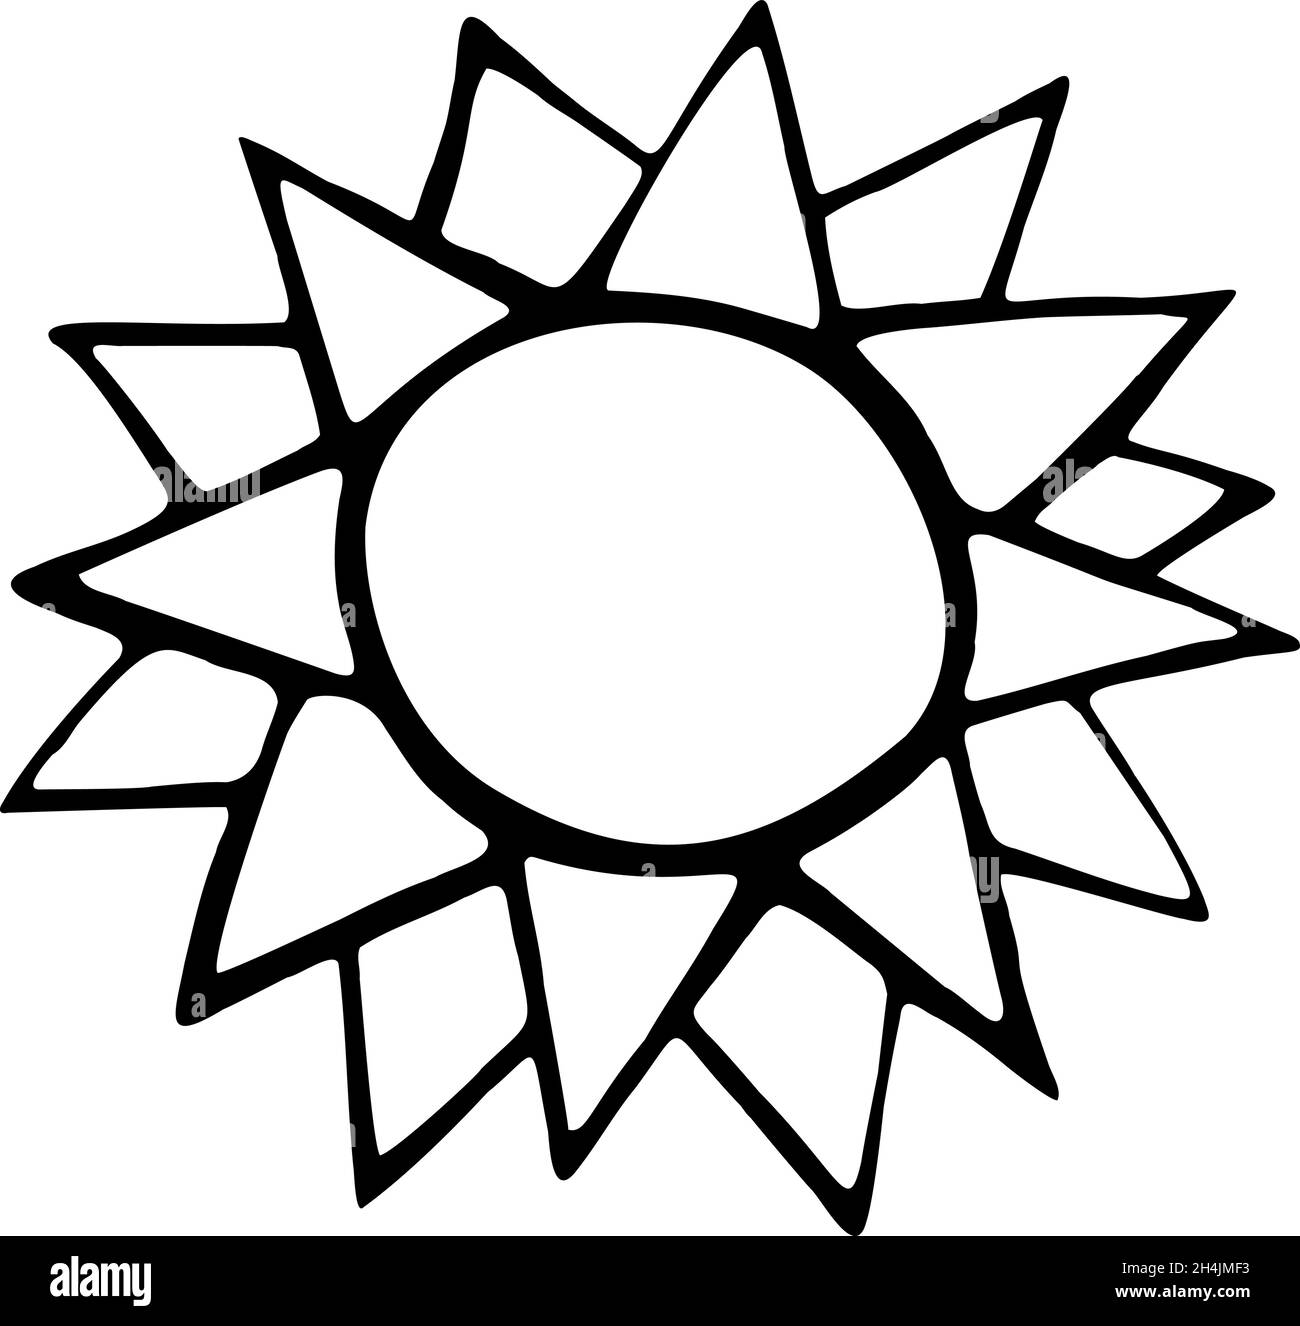 line sun Icon, linear drawing on white background. Stock Vector